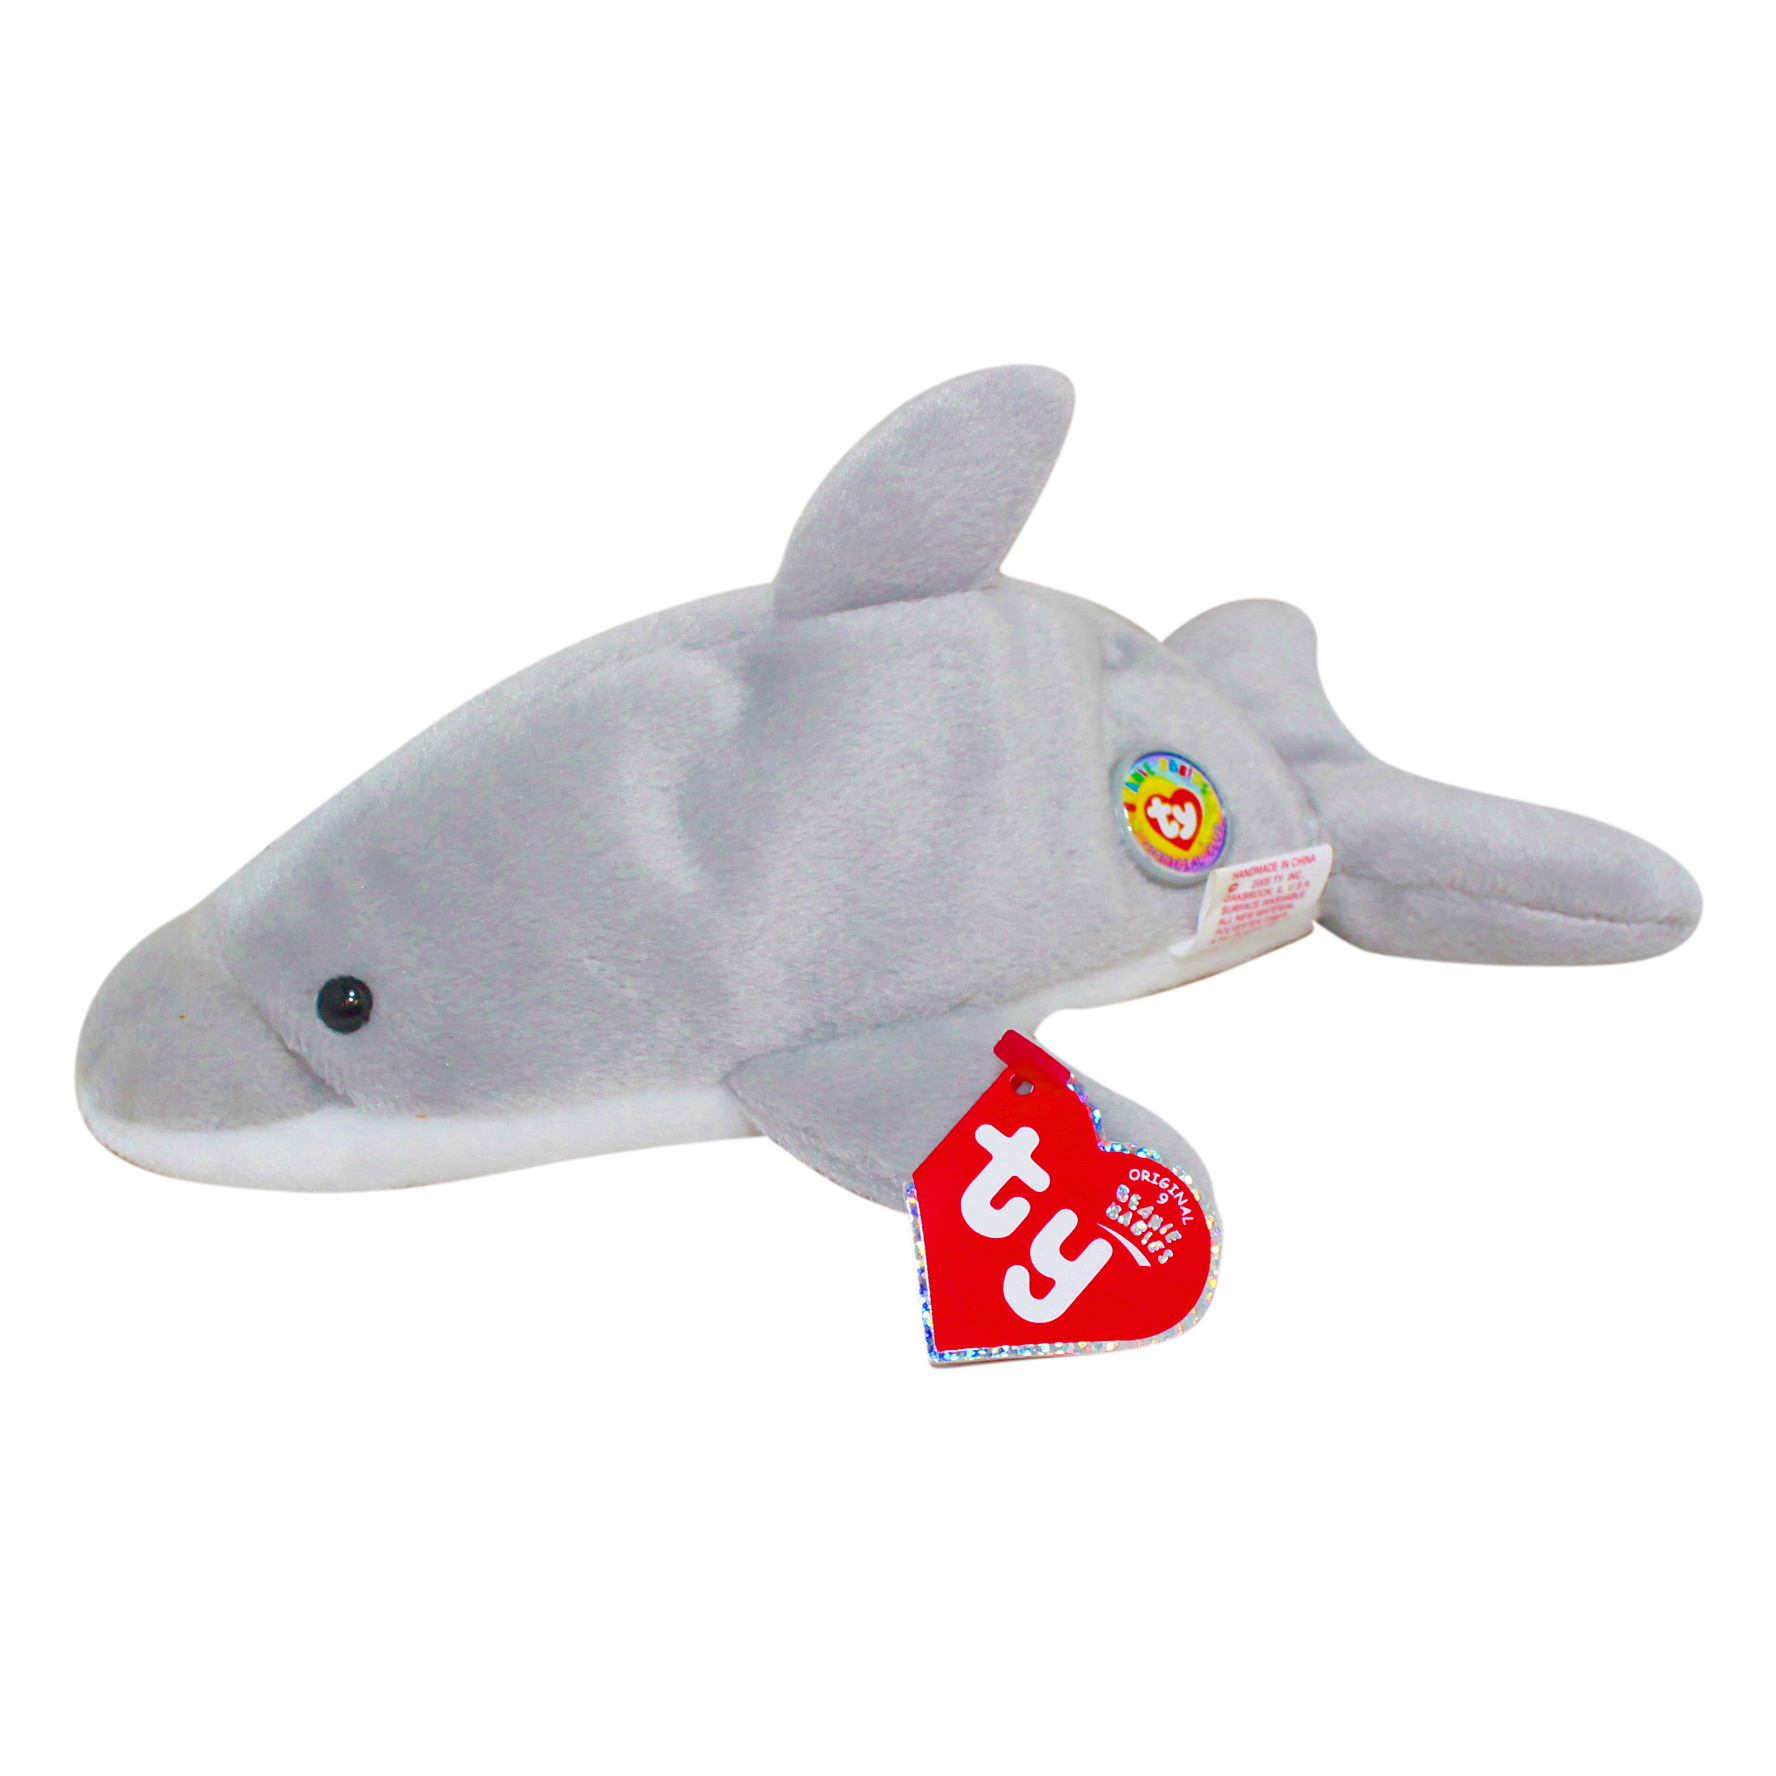 Ty Flash The Dolphin oc Beanie Baby Official Club Exclusive By Ty Inc Ebay